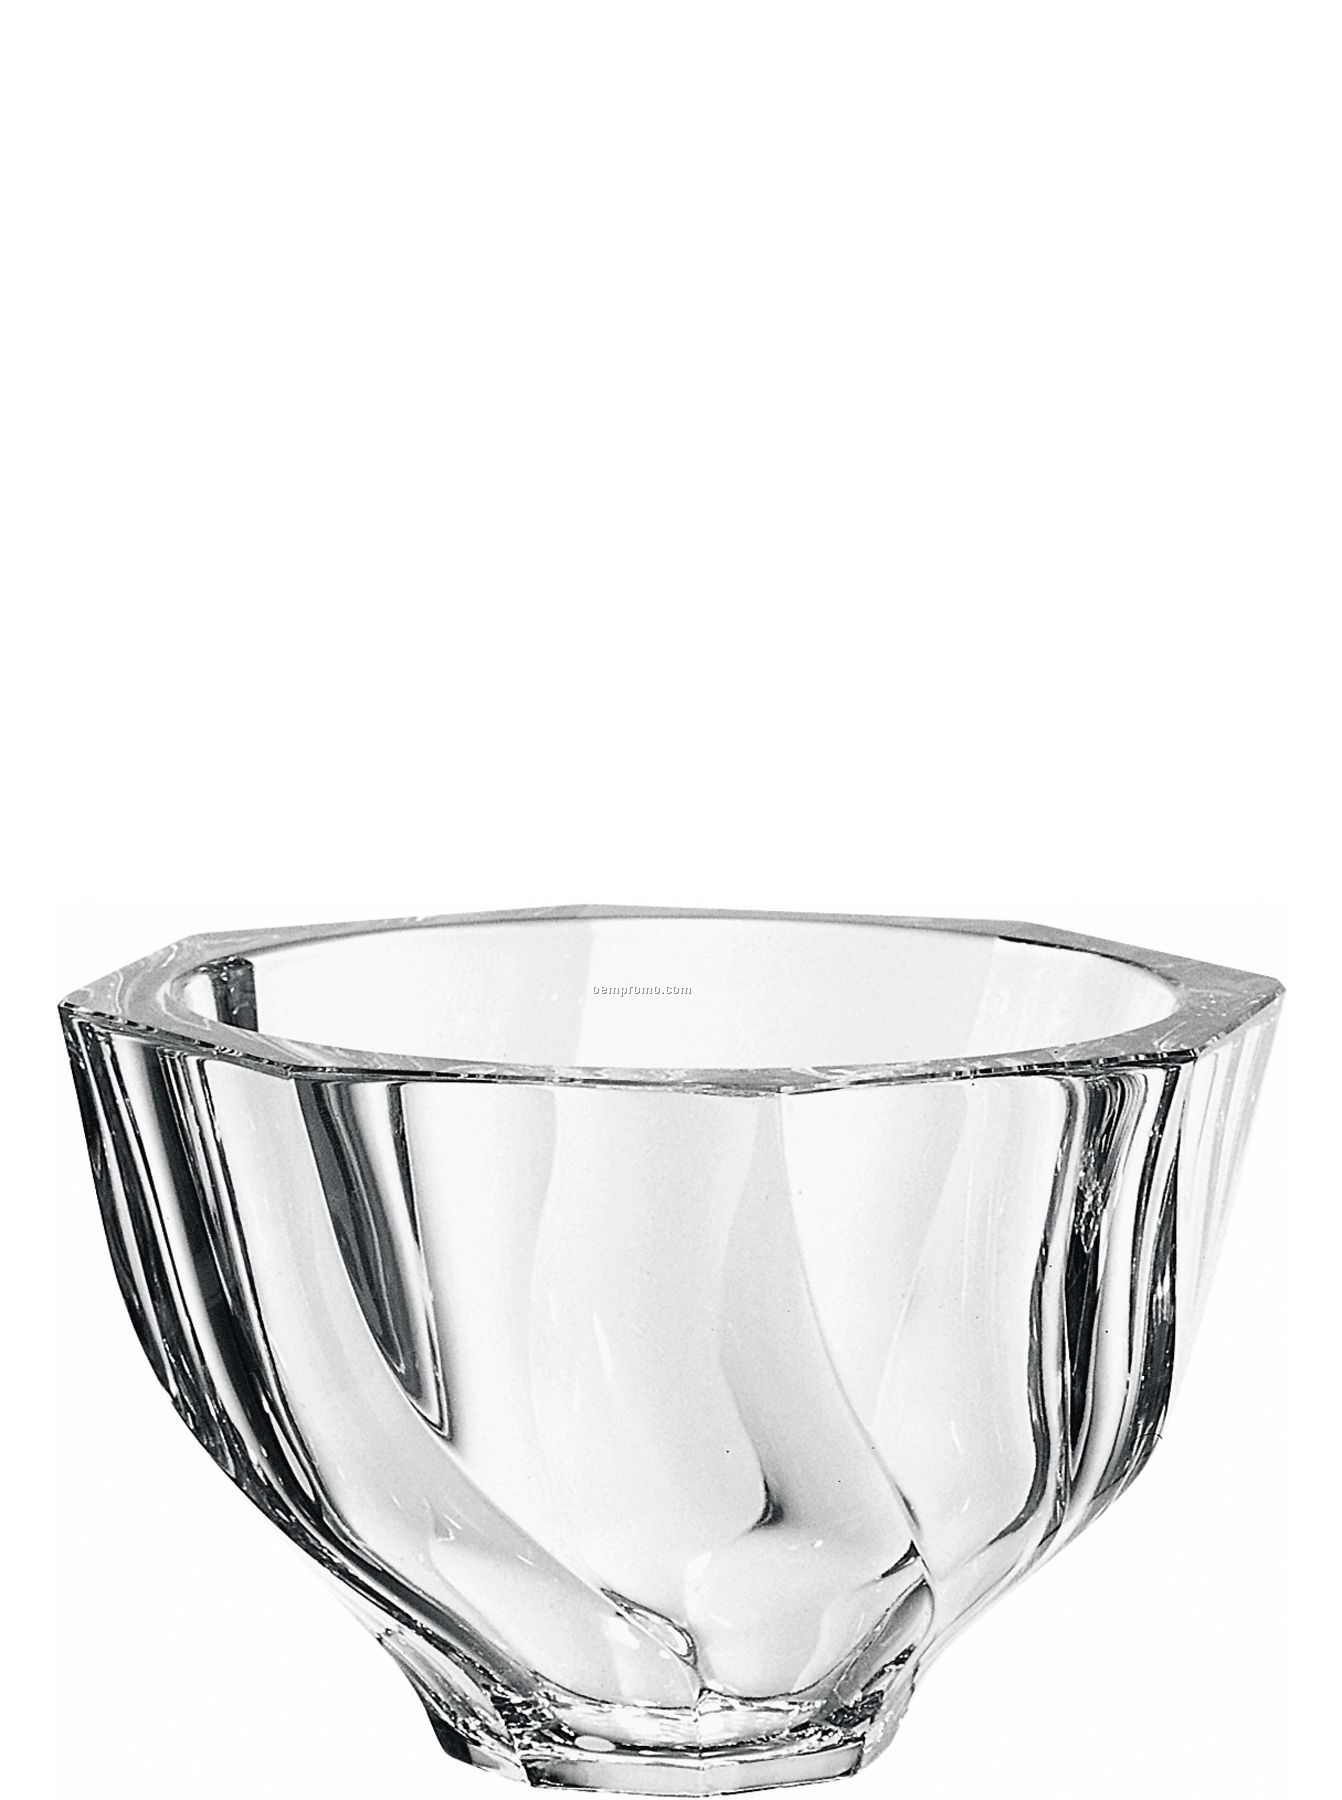 Residence Crystal Biased Cut Bowl By Olle Alberius (4 1/8